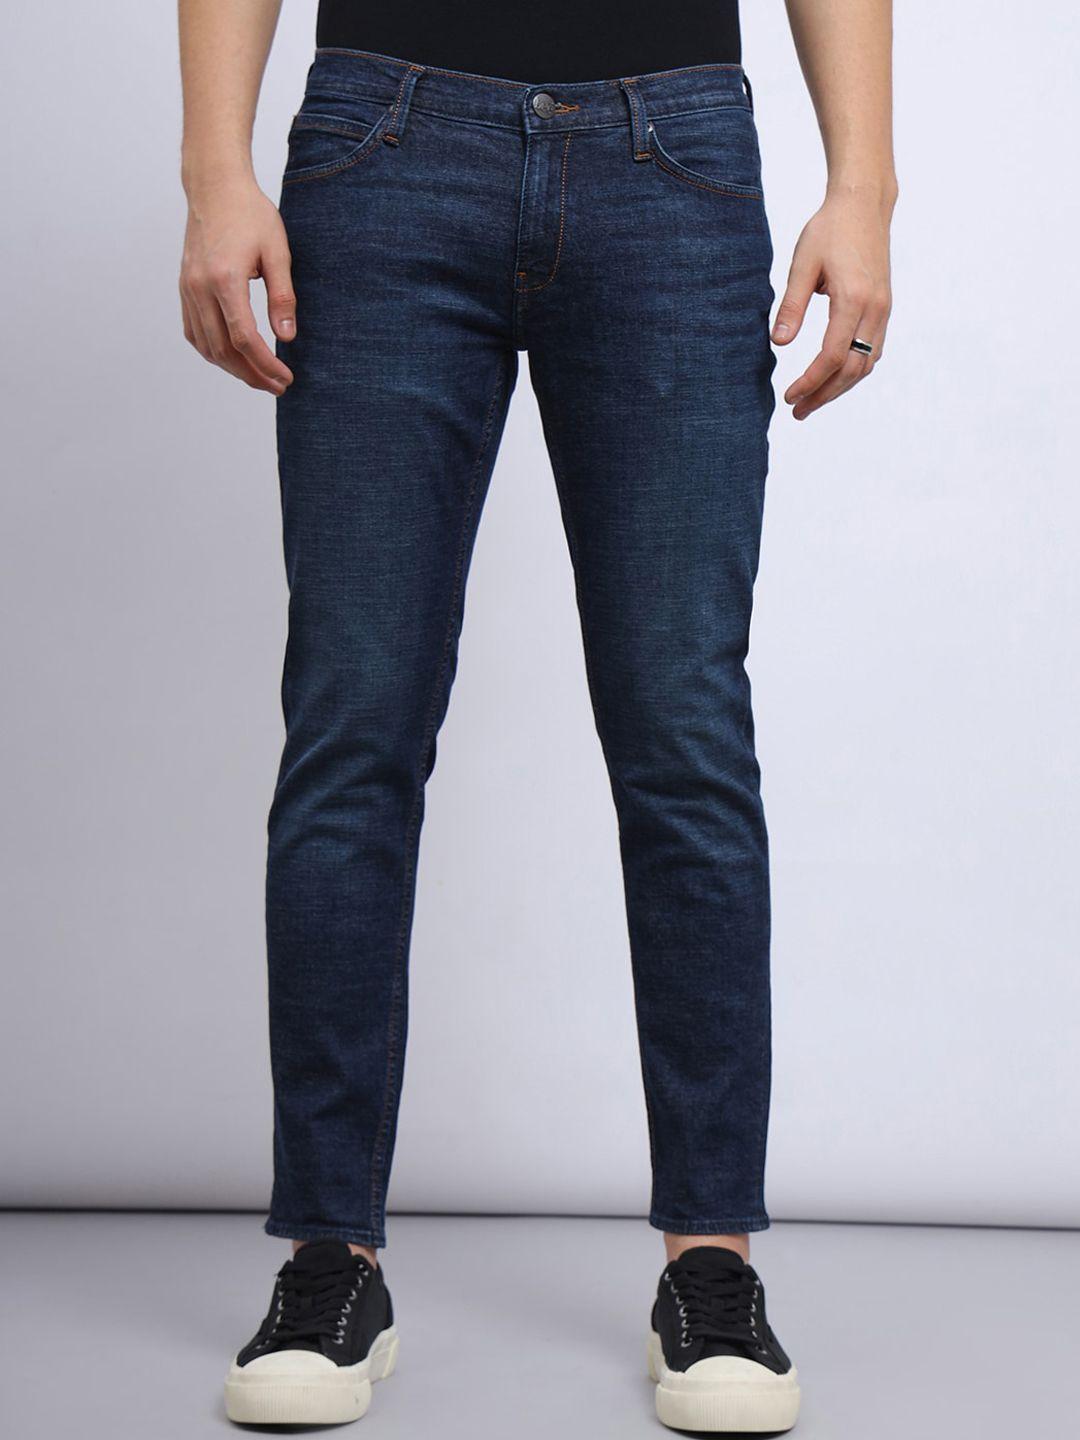 lee-men-skinny-fit-low-rise-cotton-stretchable-jeans